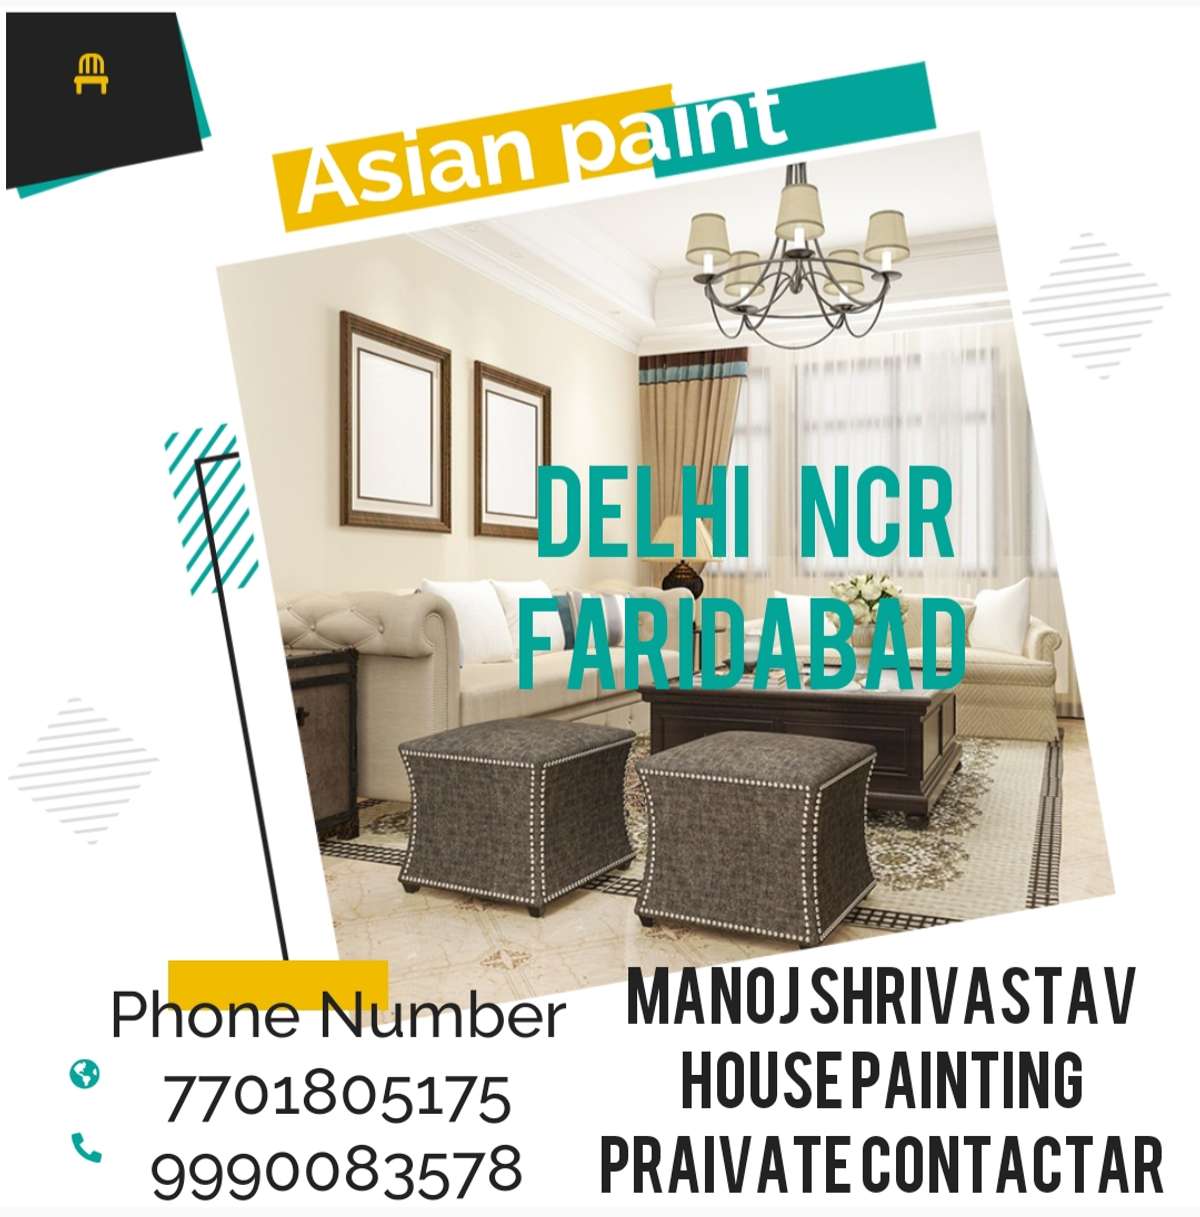 House painter contactr 7701805175